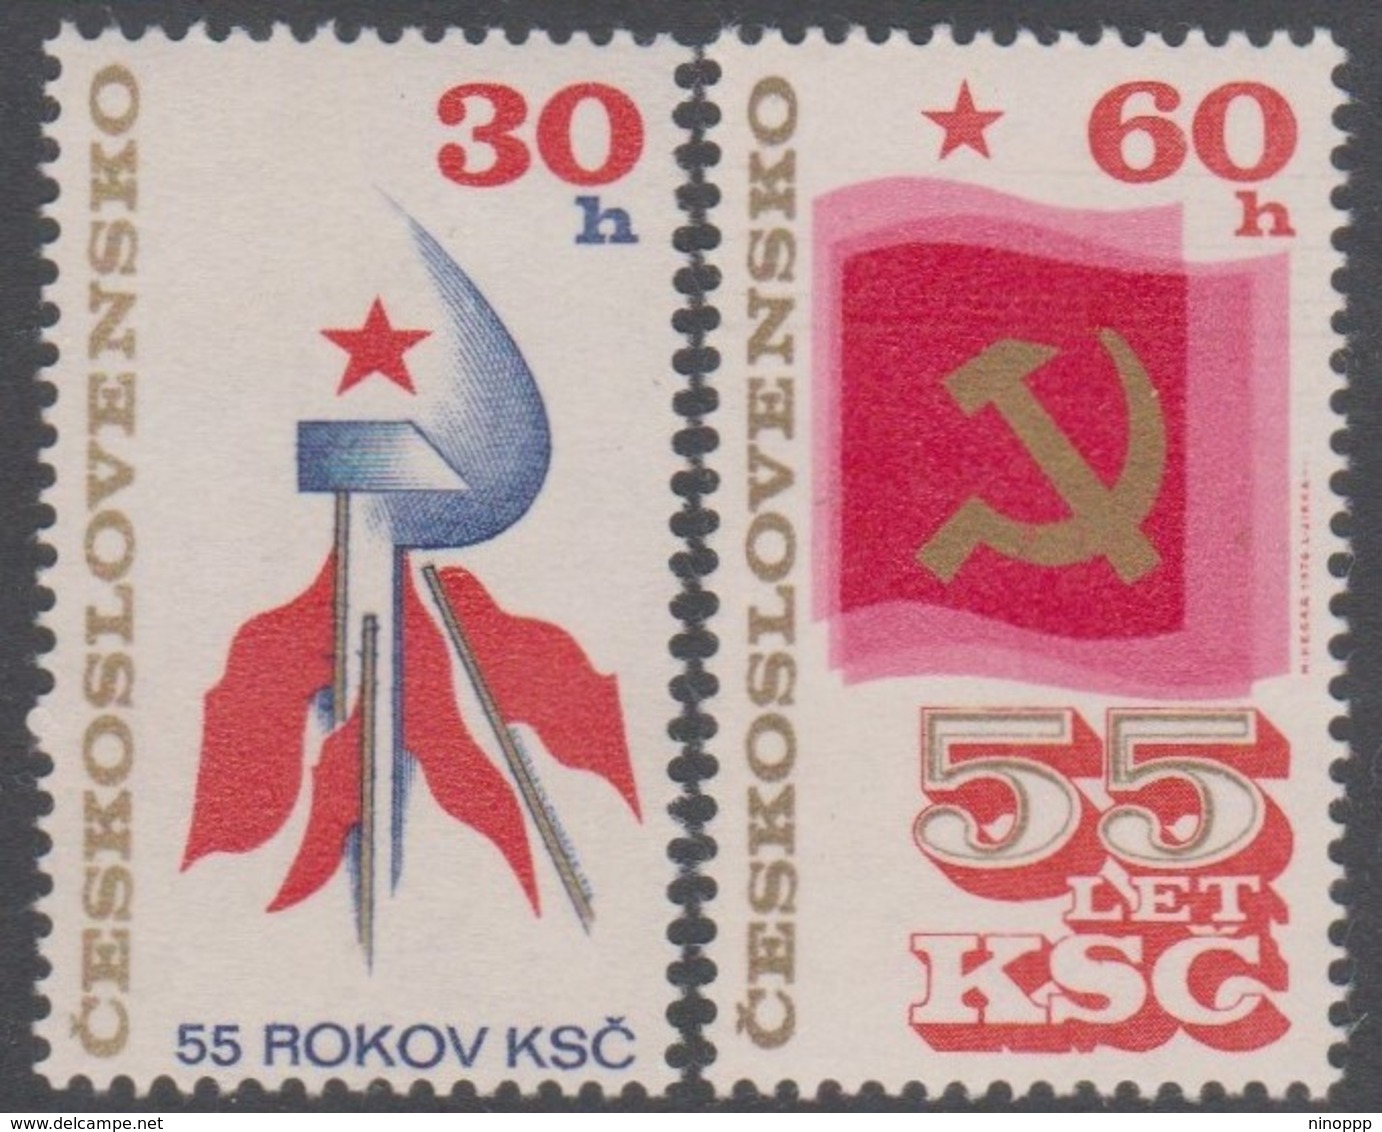 Czechoslovakia Scott 2068-2069 1976 Communist Party 55th Anniversary, Mint Never Hinged - Unused Stamps